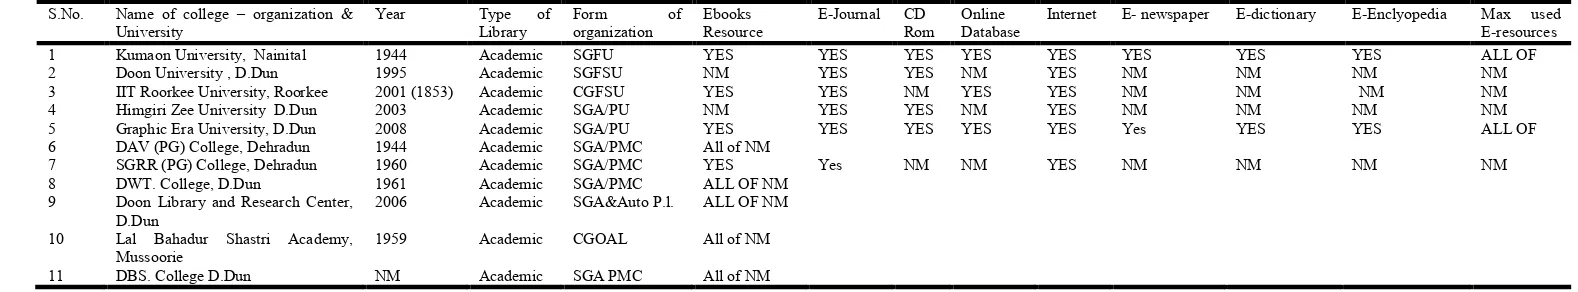 Table 4. Learning method to use E-resources and satisfaction level with use of E-resources  